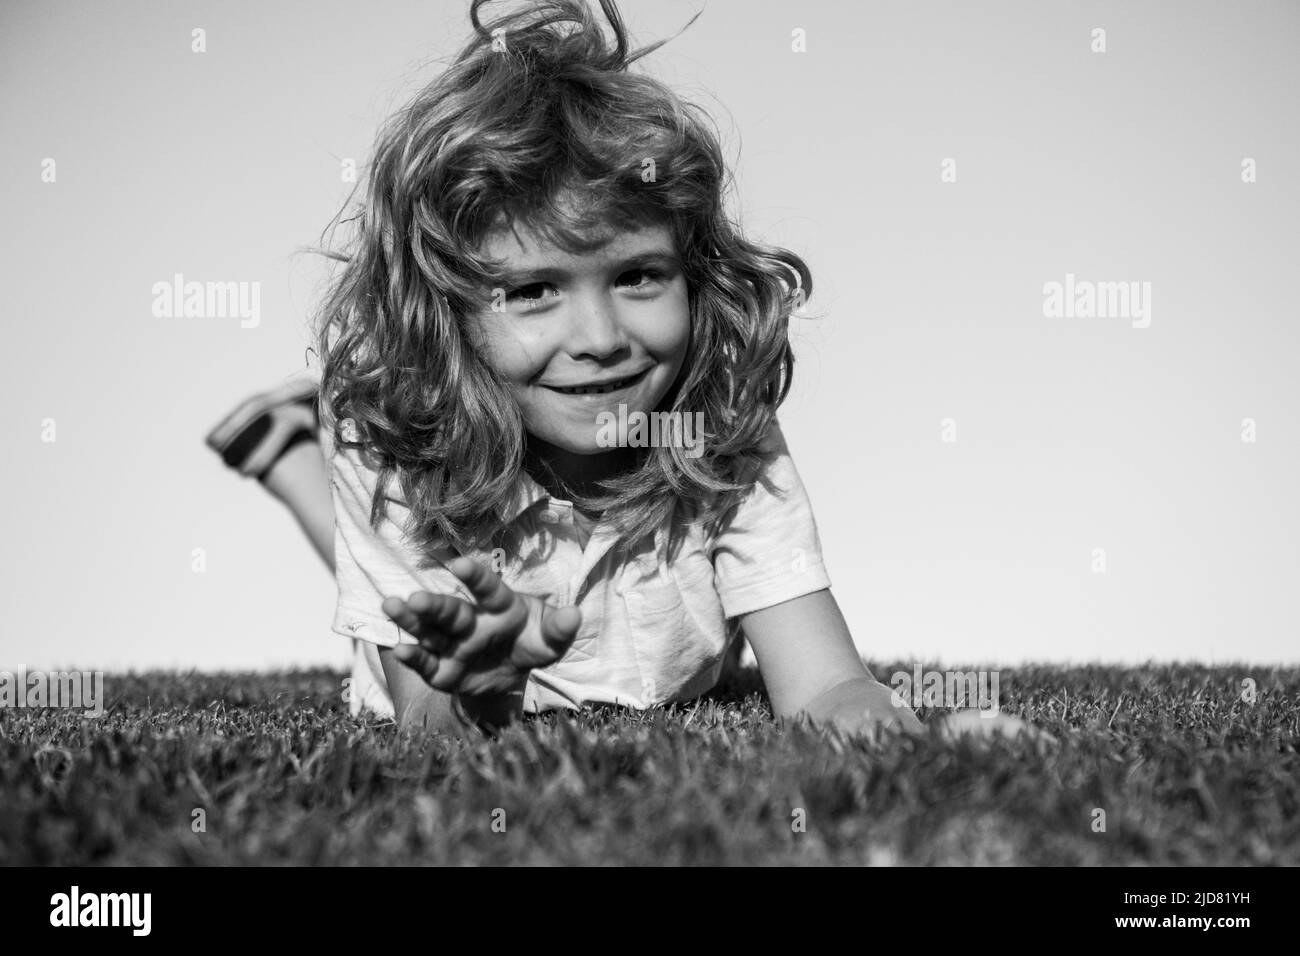 Portrait of a happy smiling child boy playing on grass field. Laughing child. Expressive facial expressions. Stock Photo